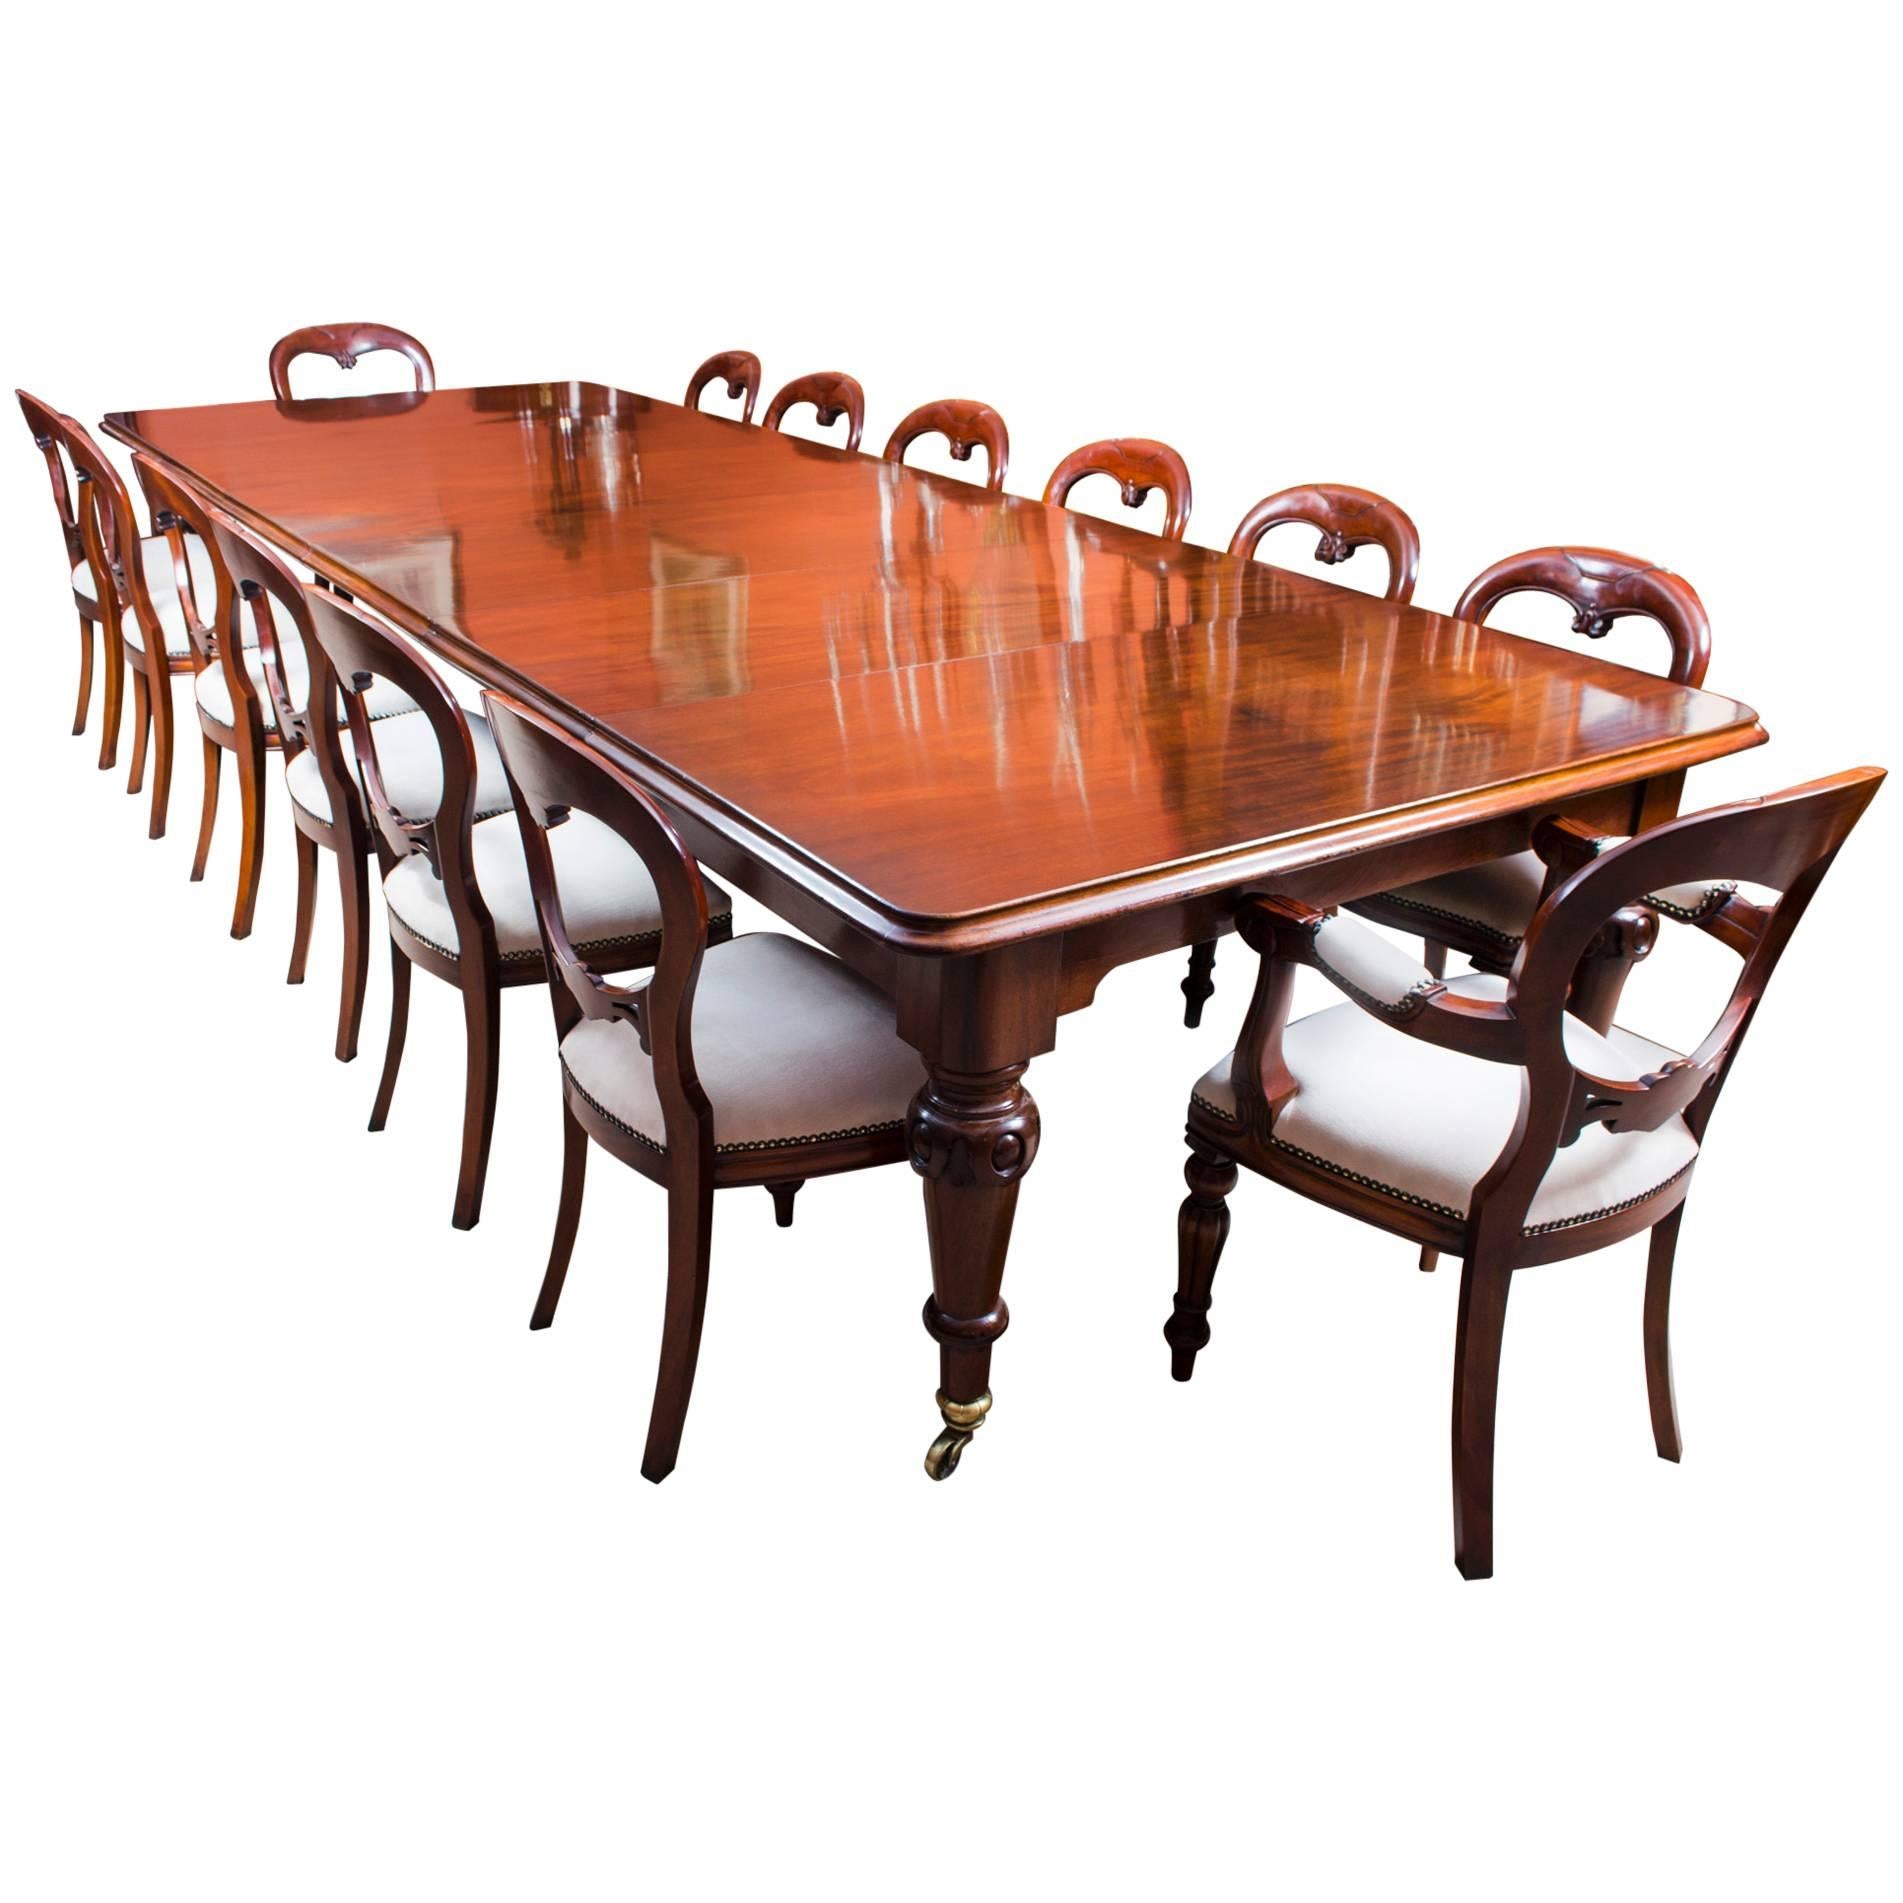 Antique Victorian Dining Table and 14 chairs, circa 1850